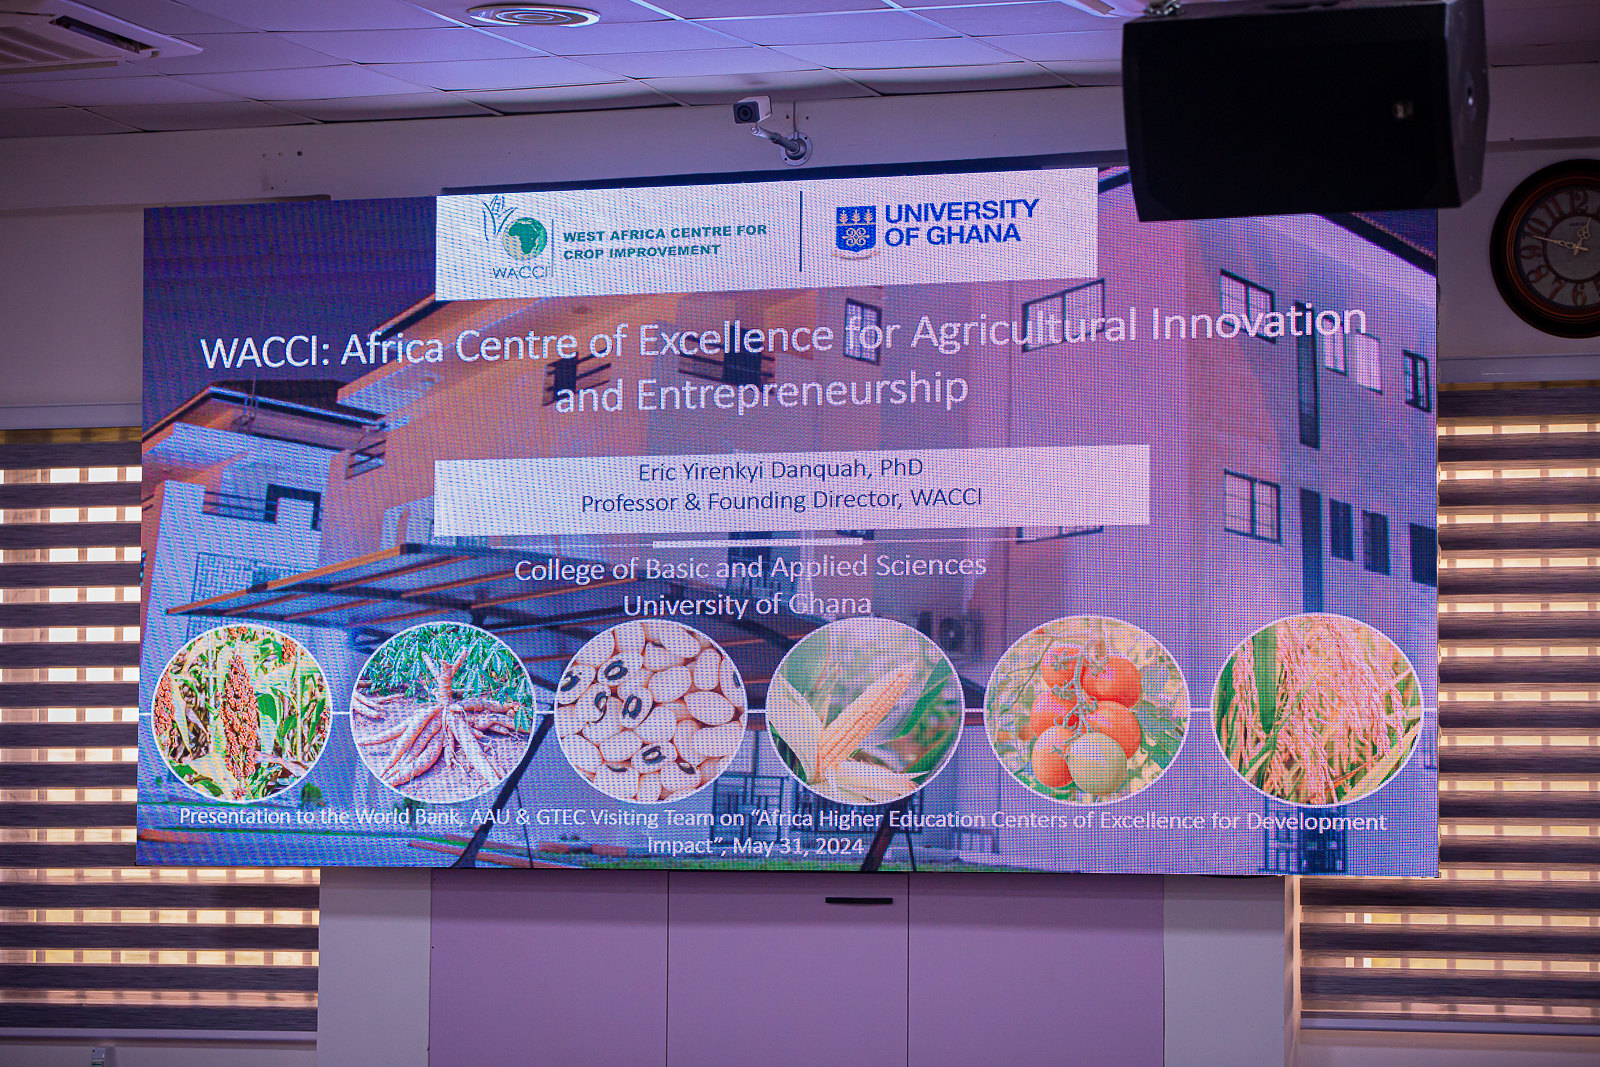 A projection of WACCI’s contribution to improving agricultural productivity and ensuring food security in Africa